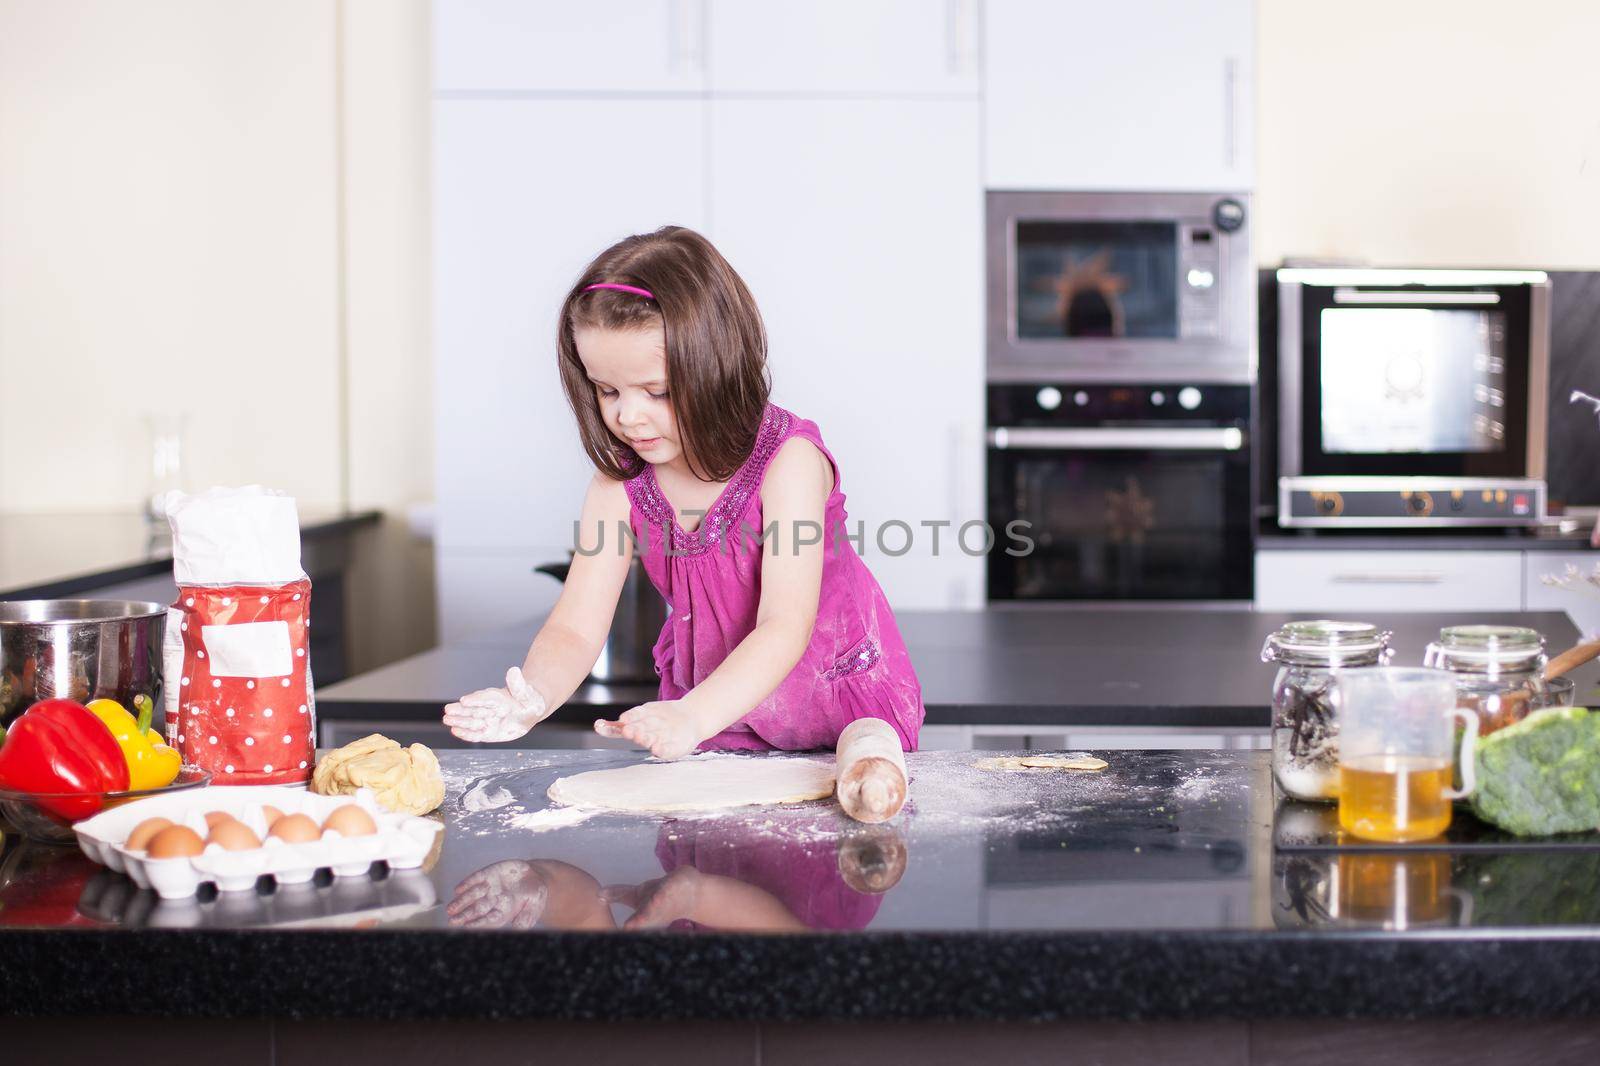 Cute little child cooking food in kitchen by Jyliana